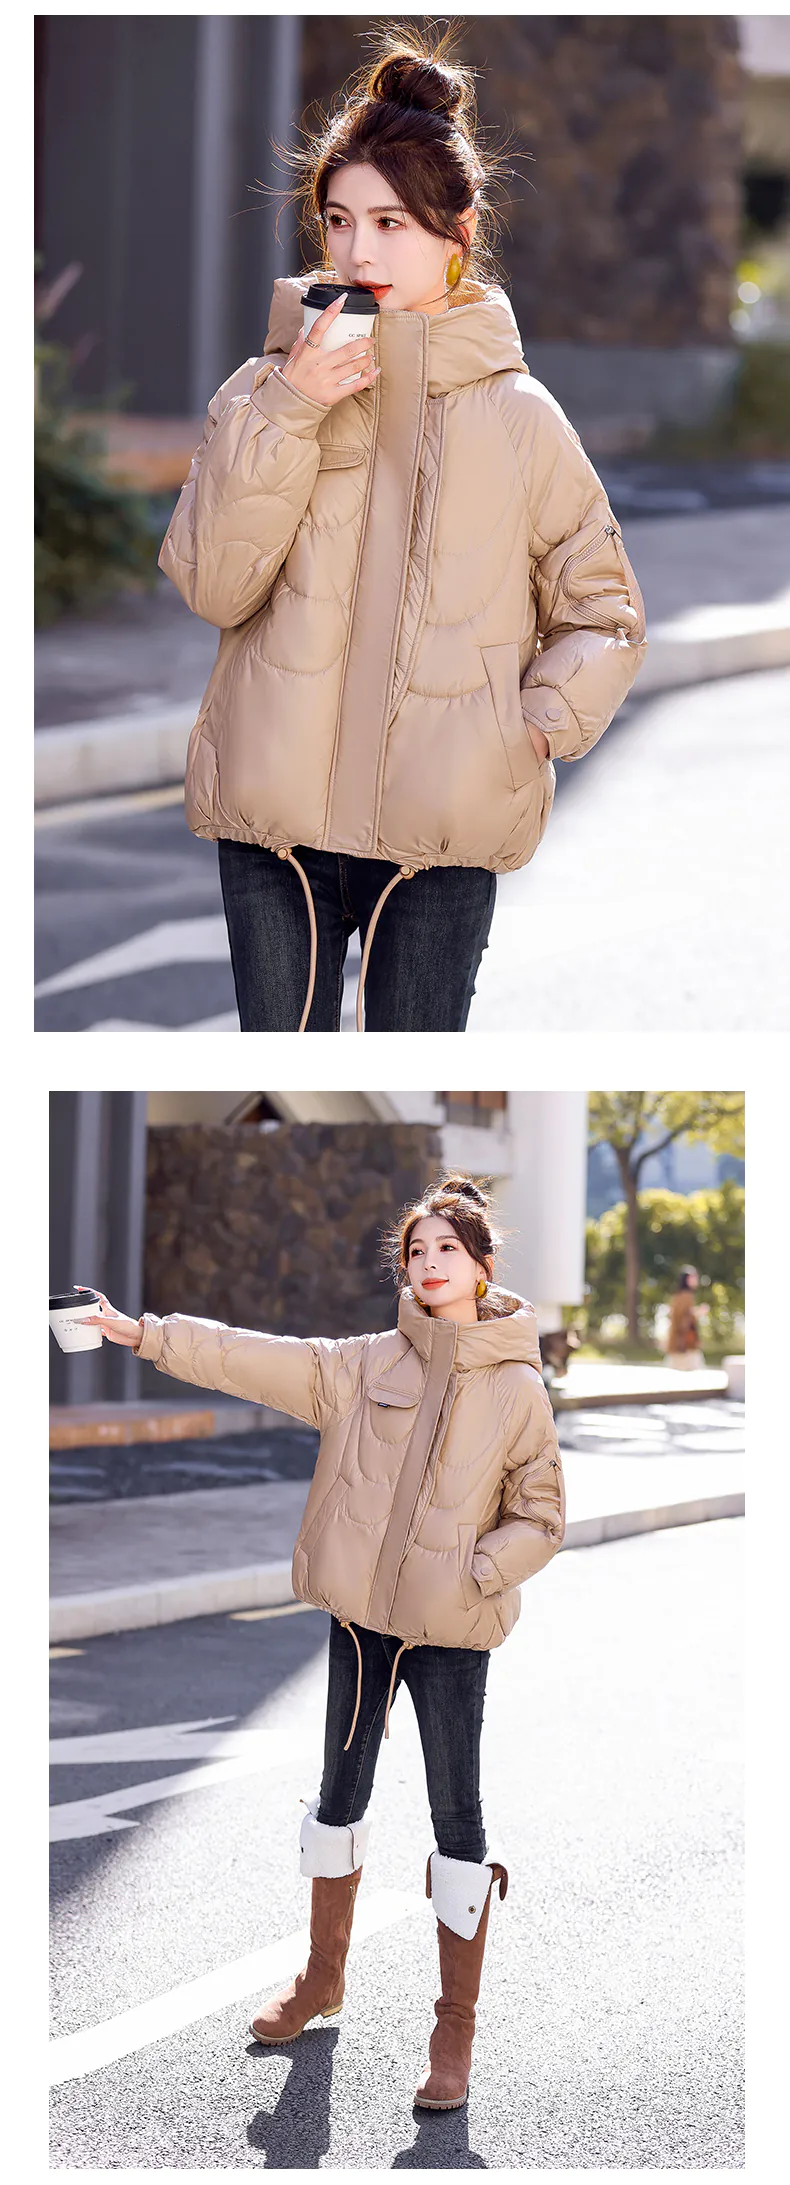 Trendy-Hooded-Cotton-Puffer-Jacket-Winter-Warm-Casual-Coat21